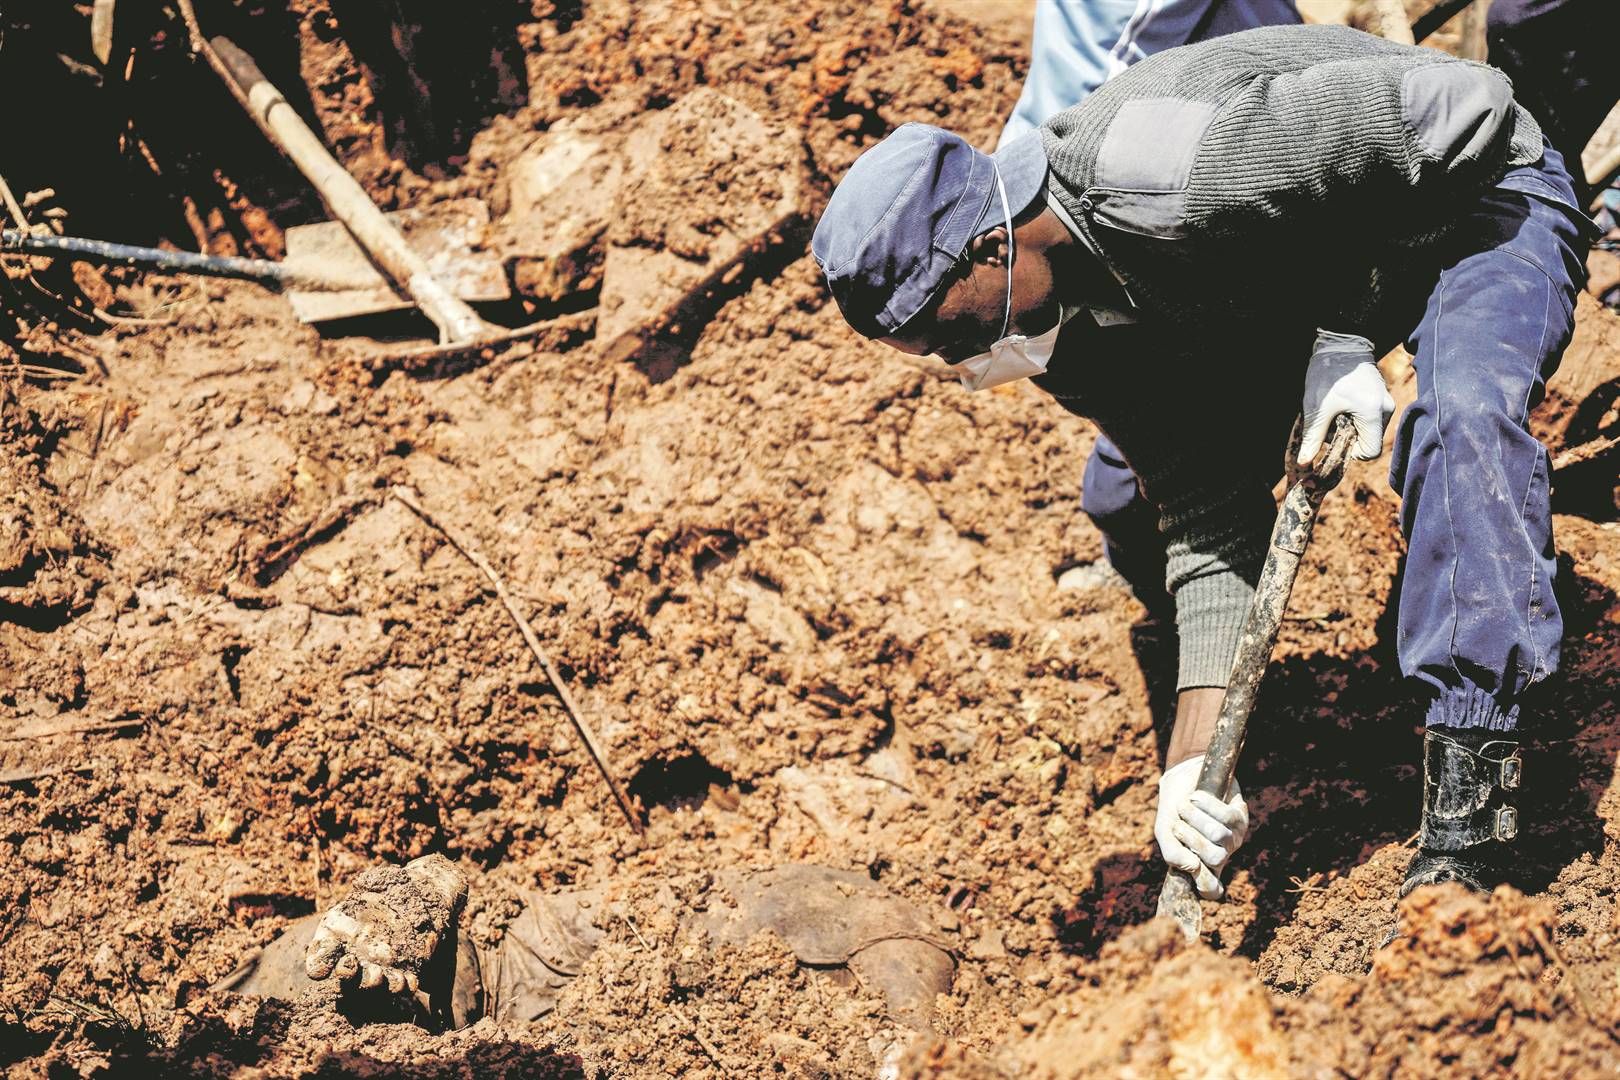 A policeman helps to dig for the body of 17-year-old Agreement Munanga. Picture: AP / KB Mpofu